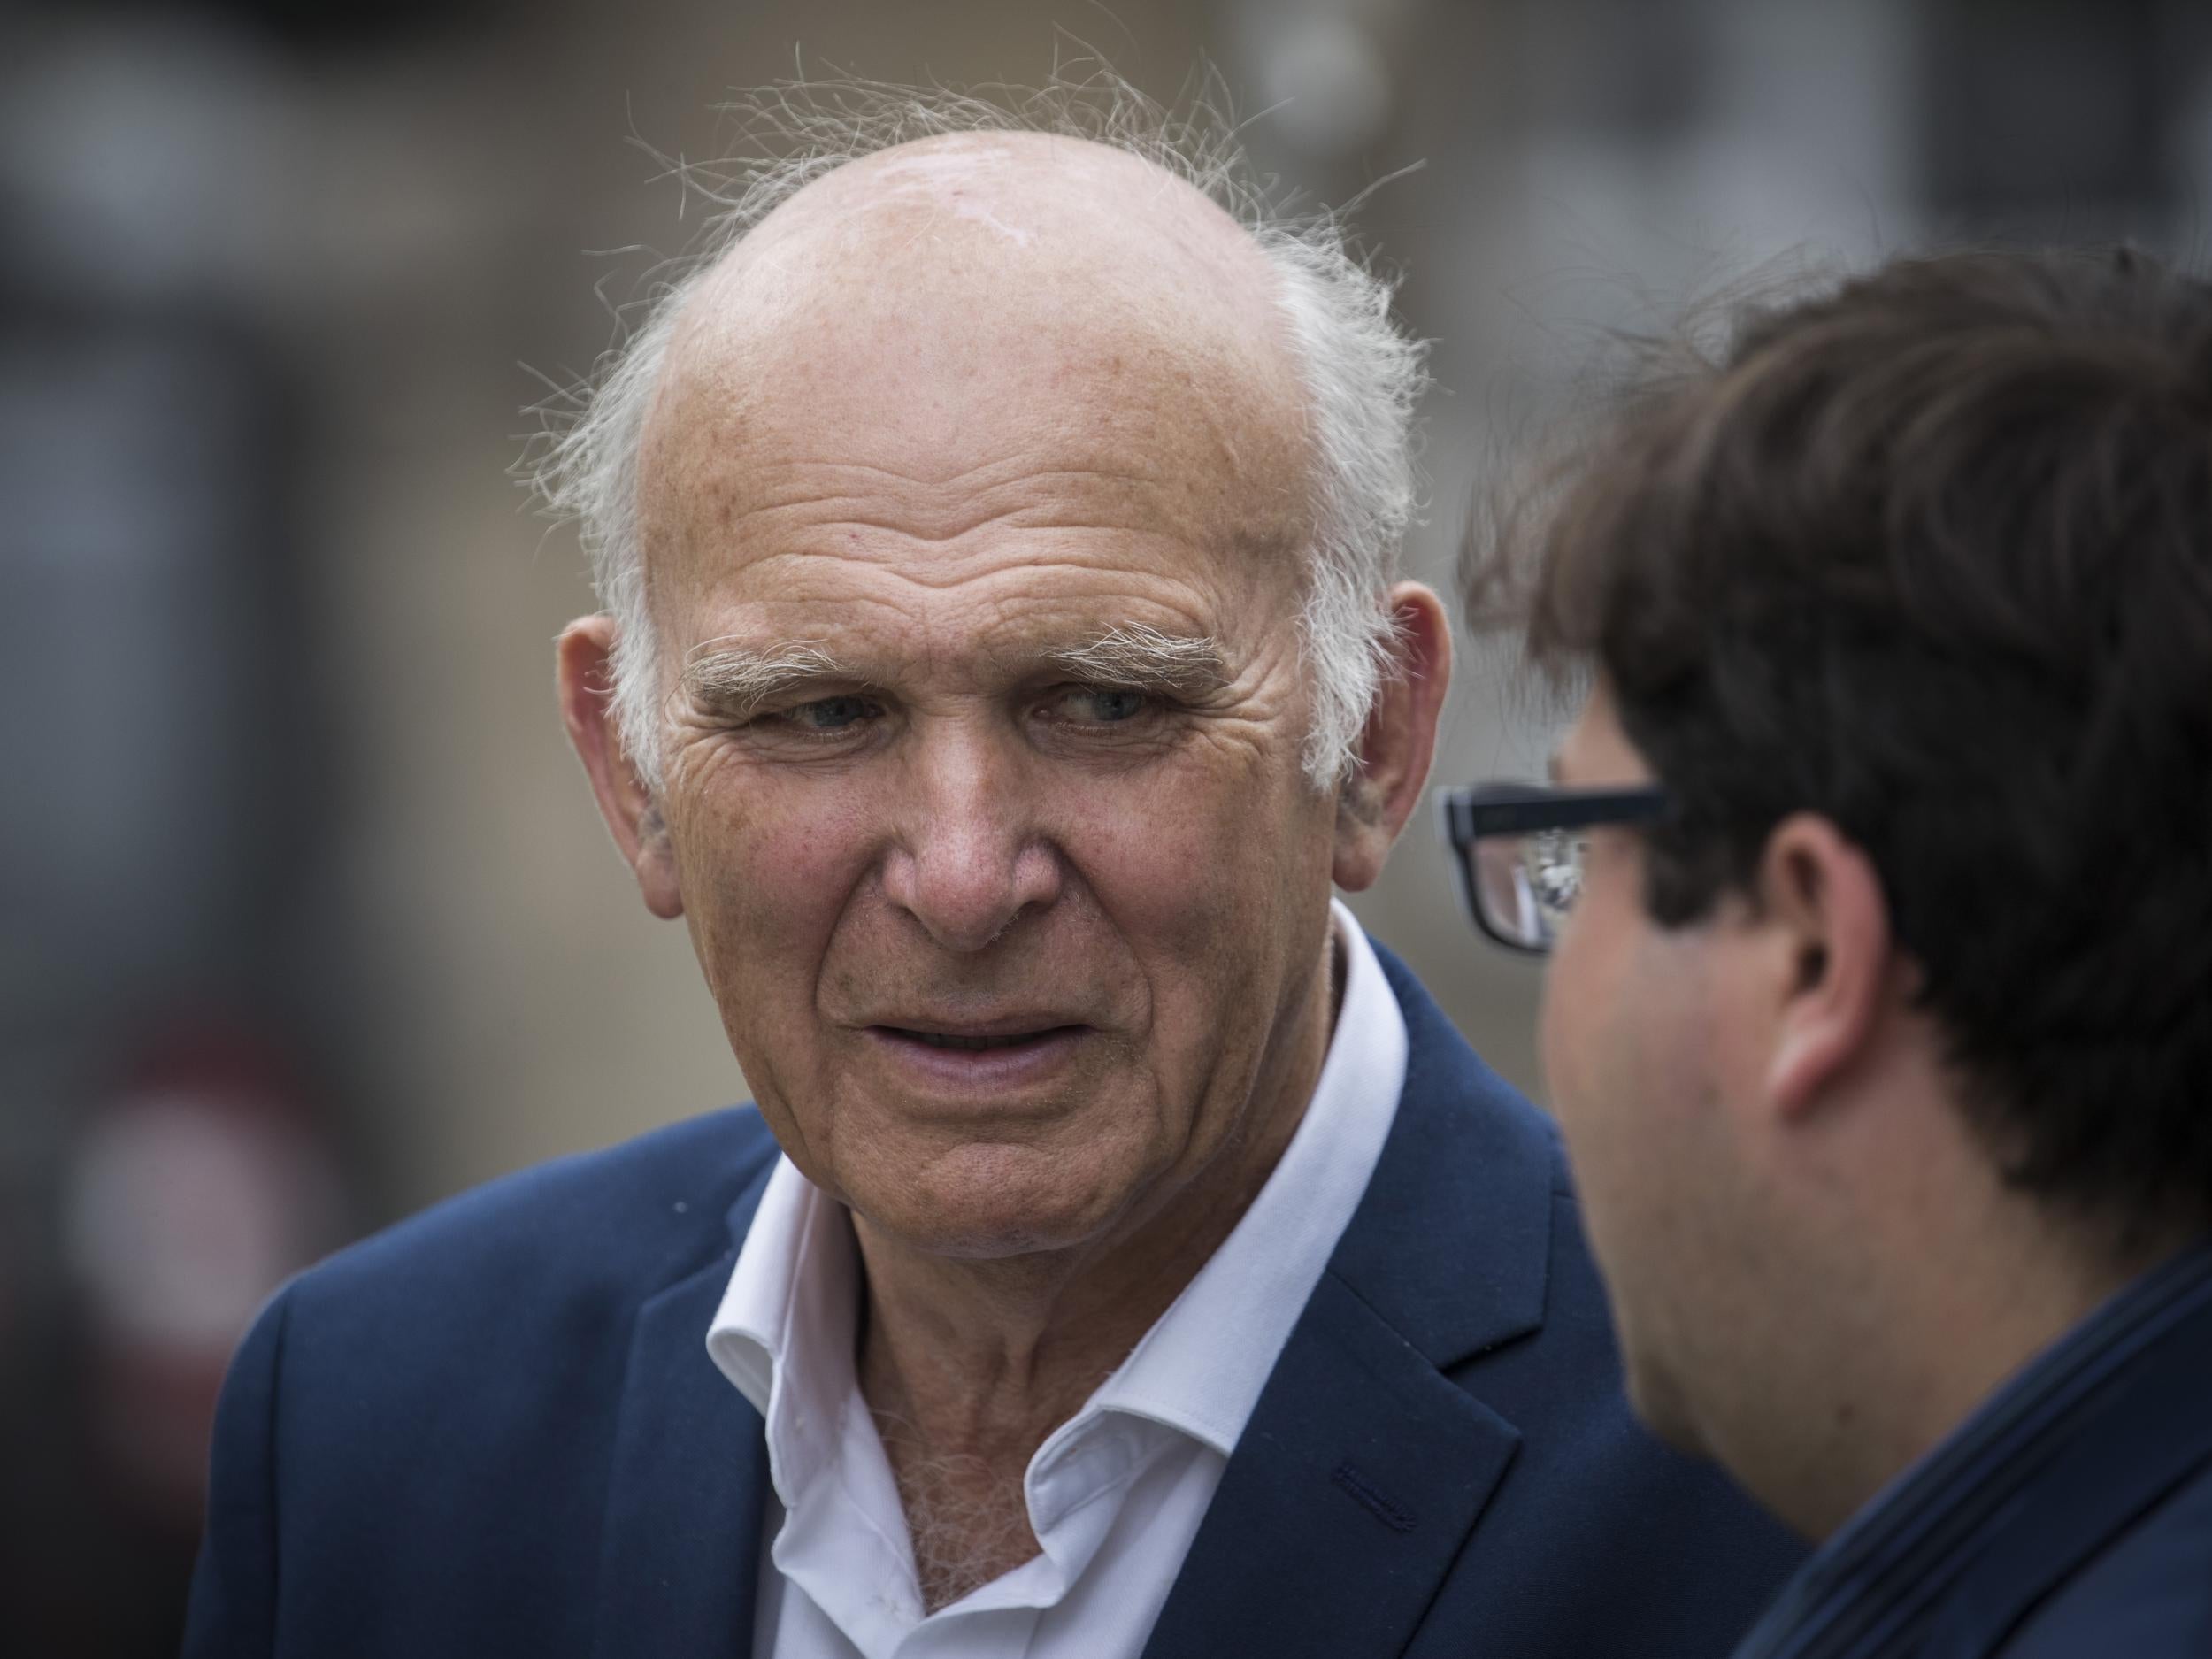 Liberal Democrat leader Sir Vince Cable has backed The Independent's campaign